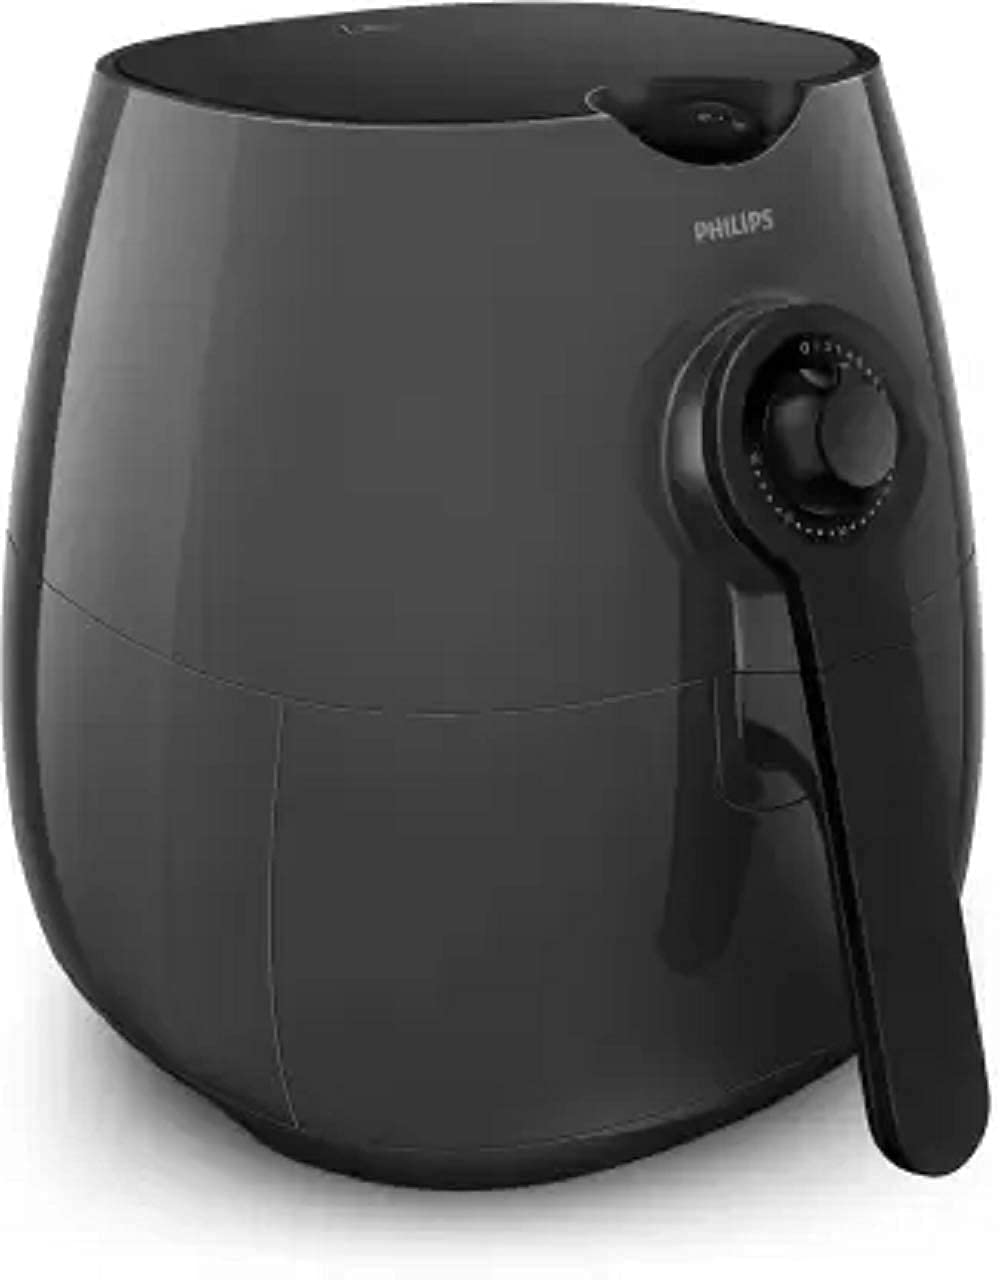 HD9216/43 Electric Fryer Review